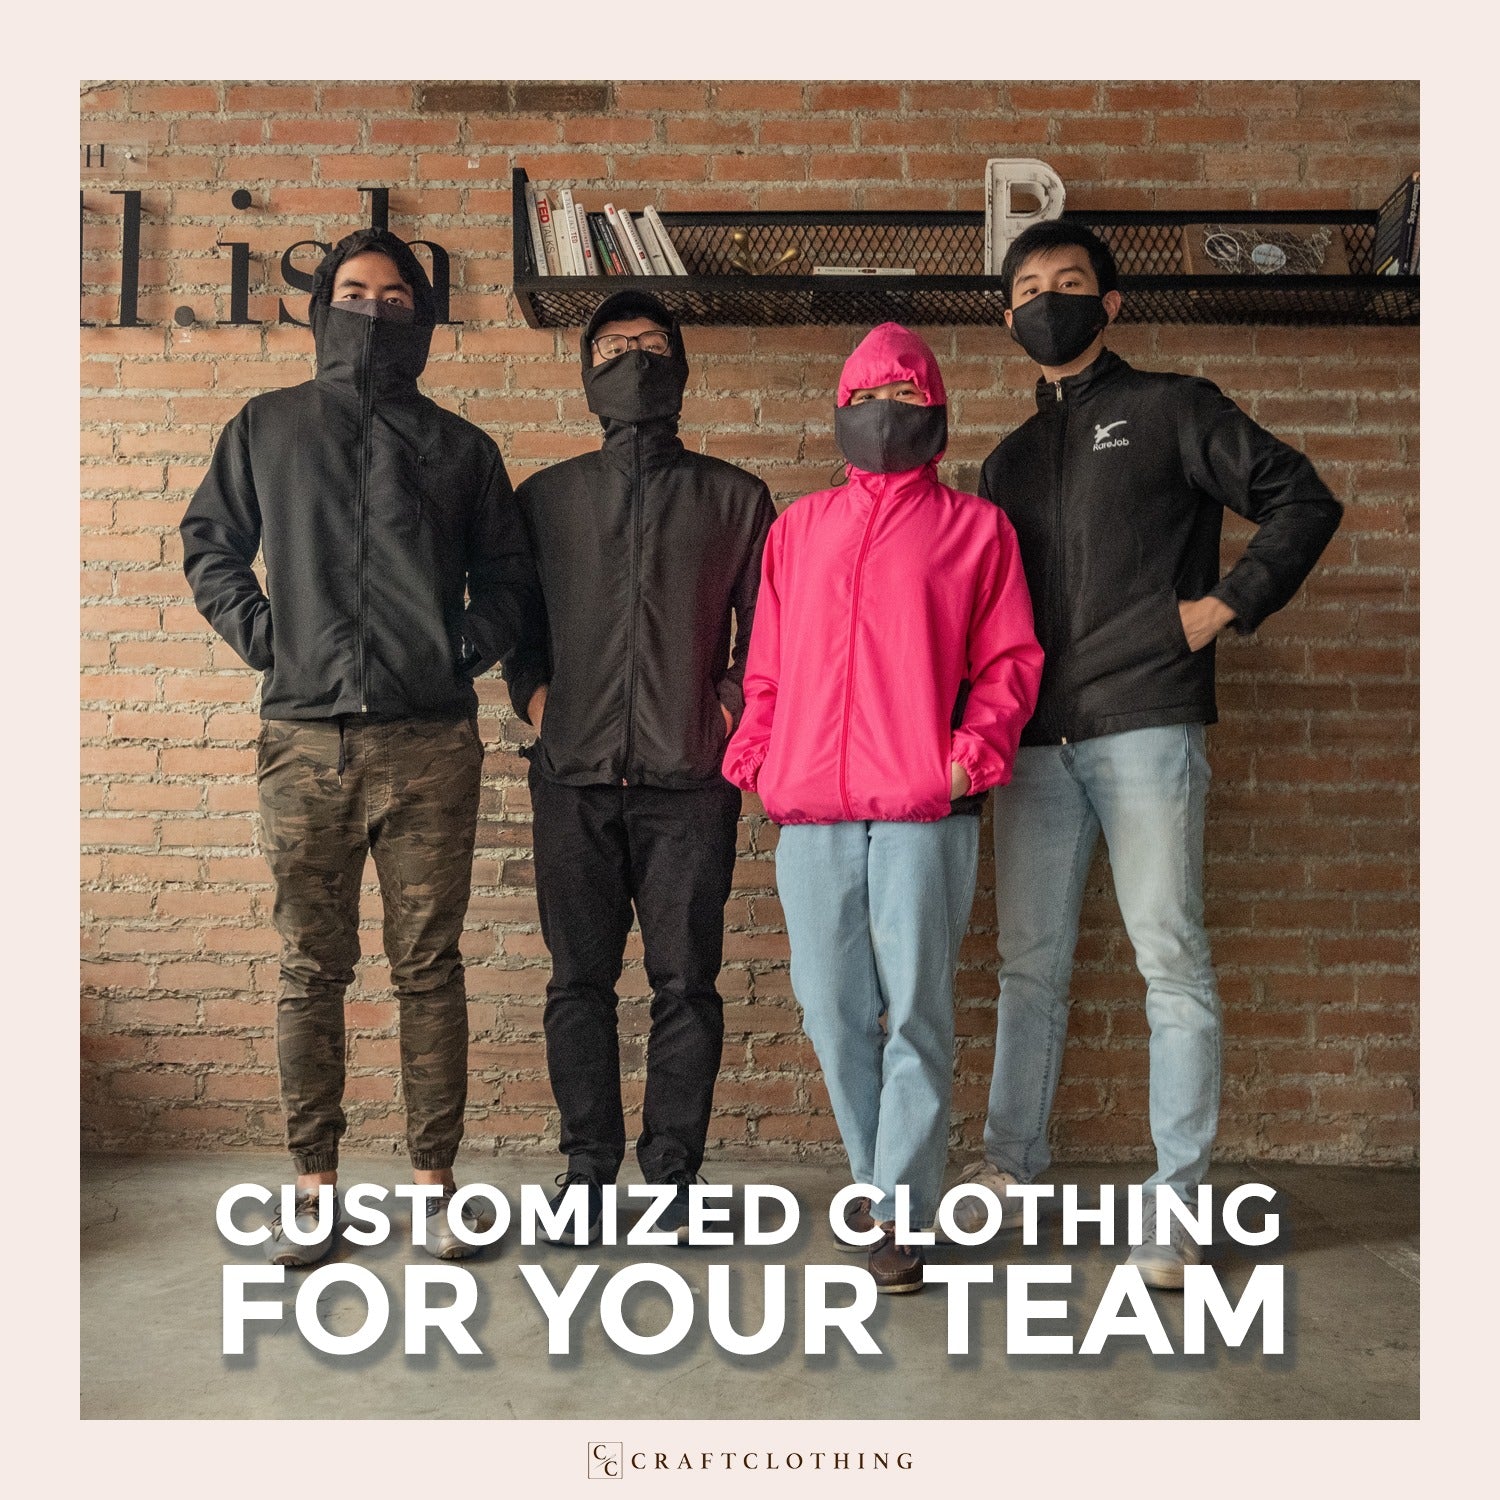 CUSTOMIZED CLOTHING FOR YOUR TEAM